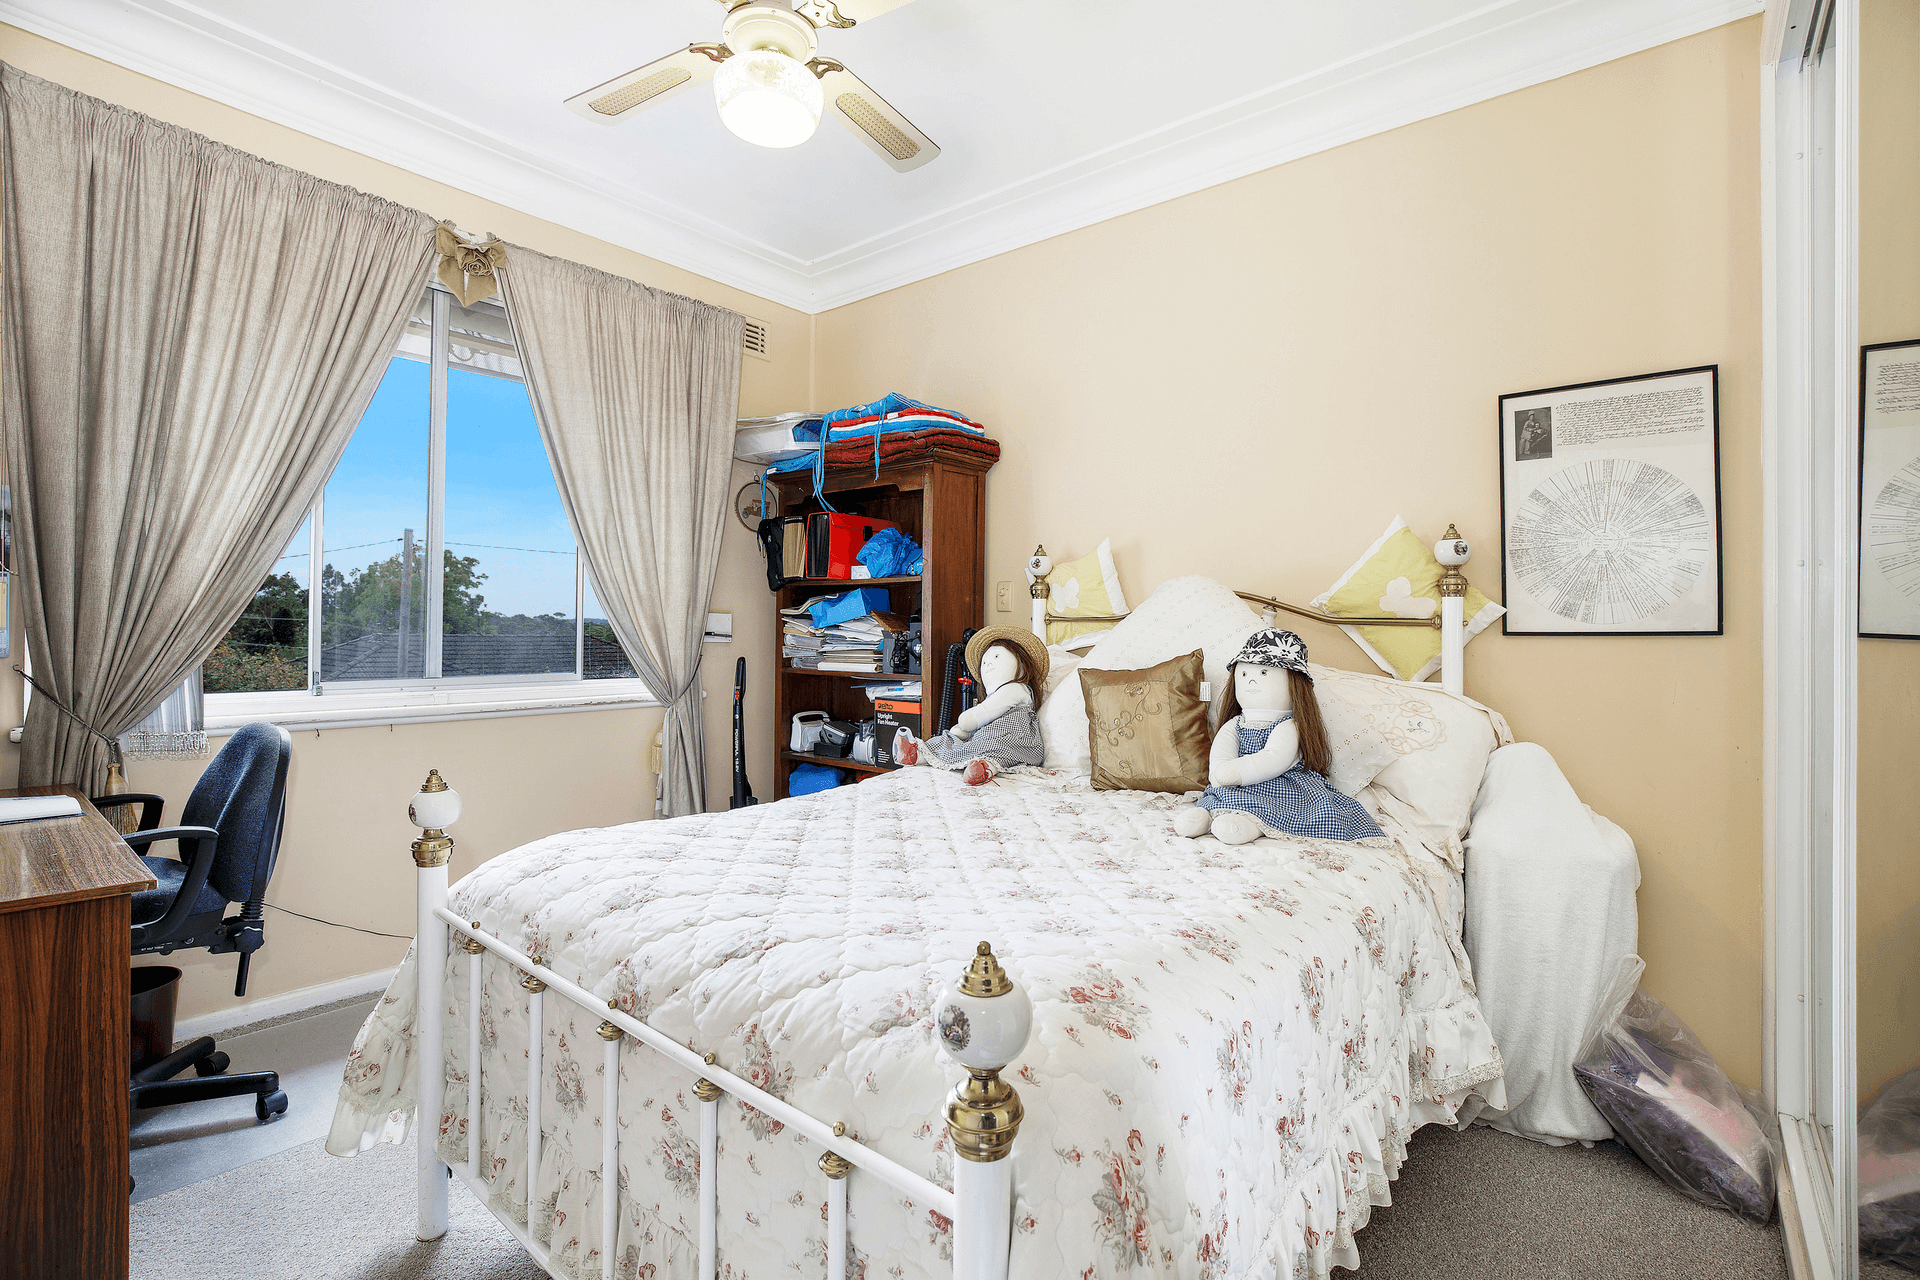 11 Crystal Crescent, Wyong, NSW 2259